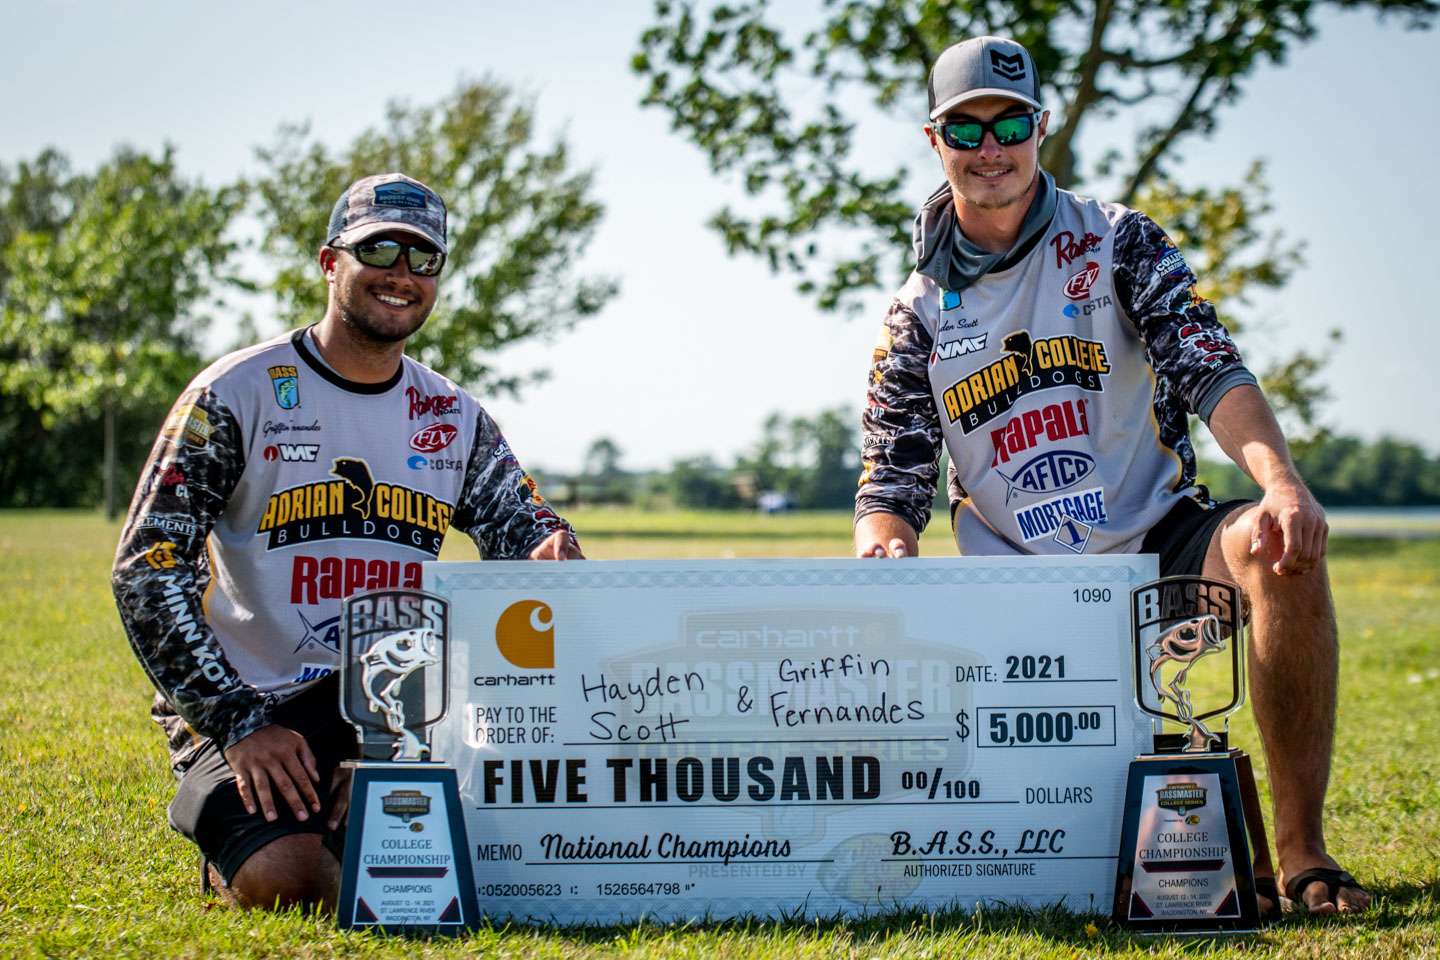 Griffin Fernandes and Hayden Scott of Adrian College took home the title with a three-day total of 63 pounds, 10 ounces. 